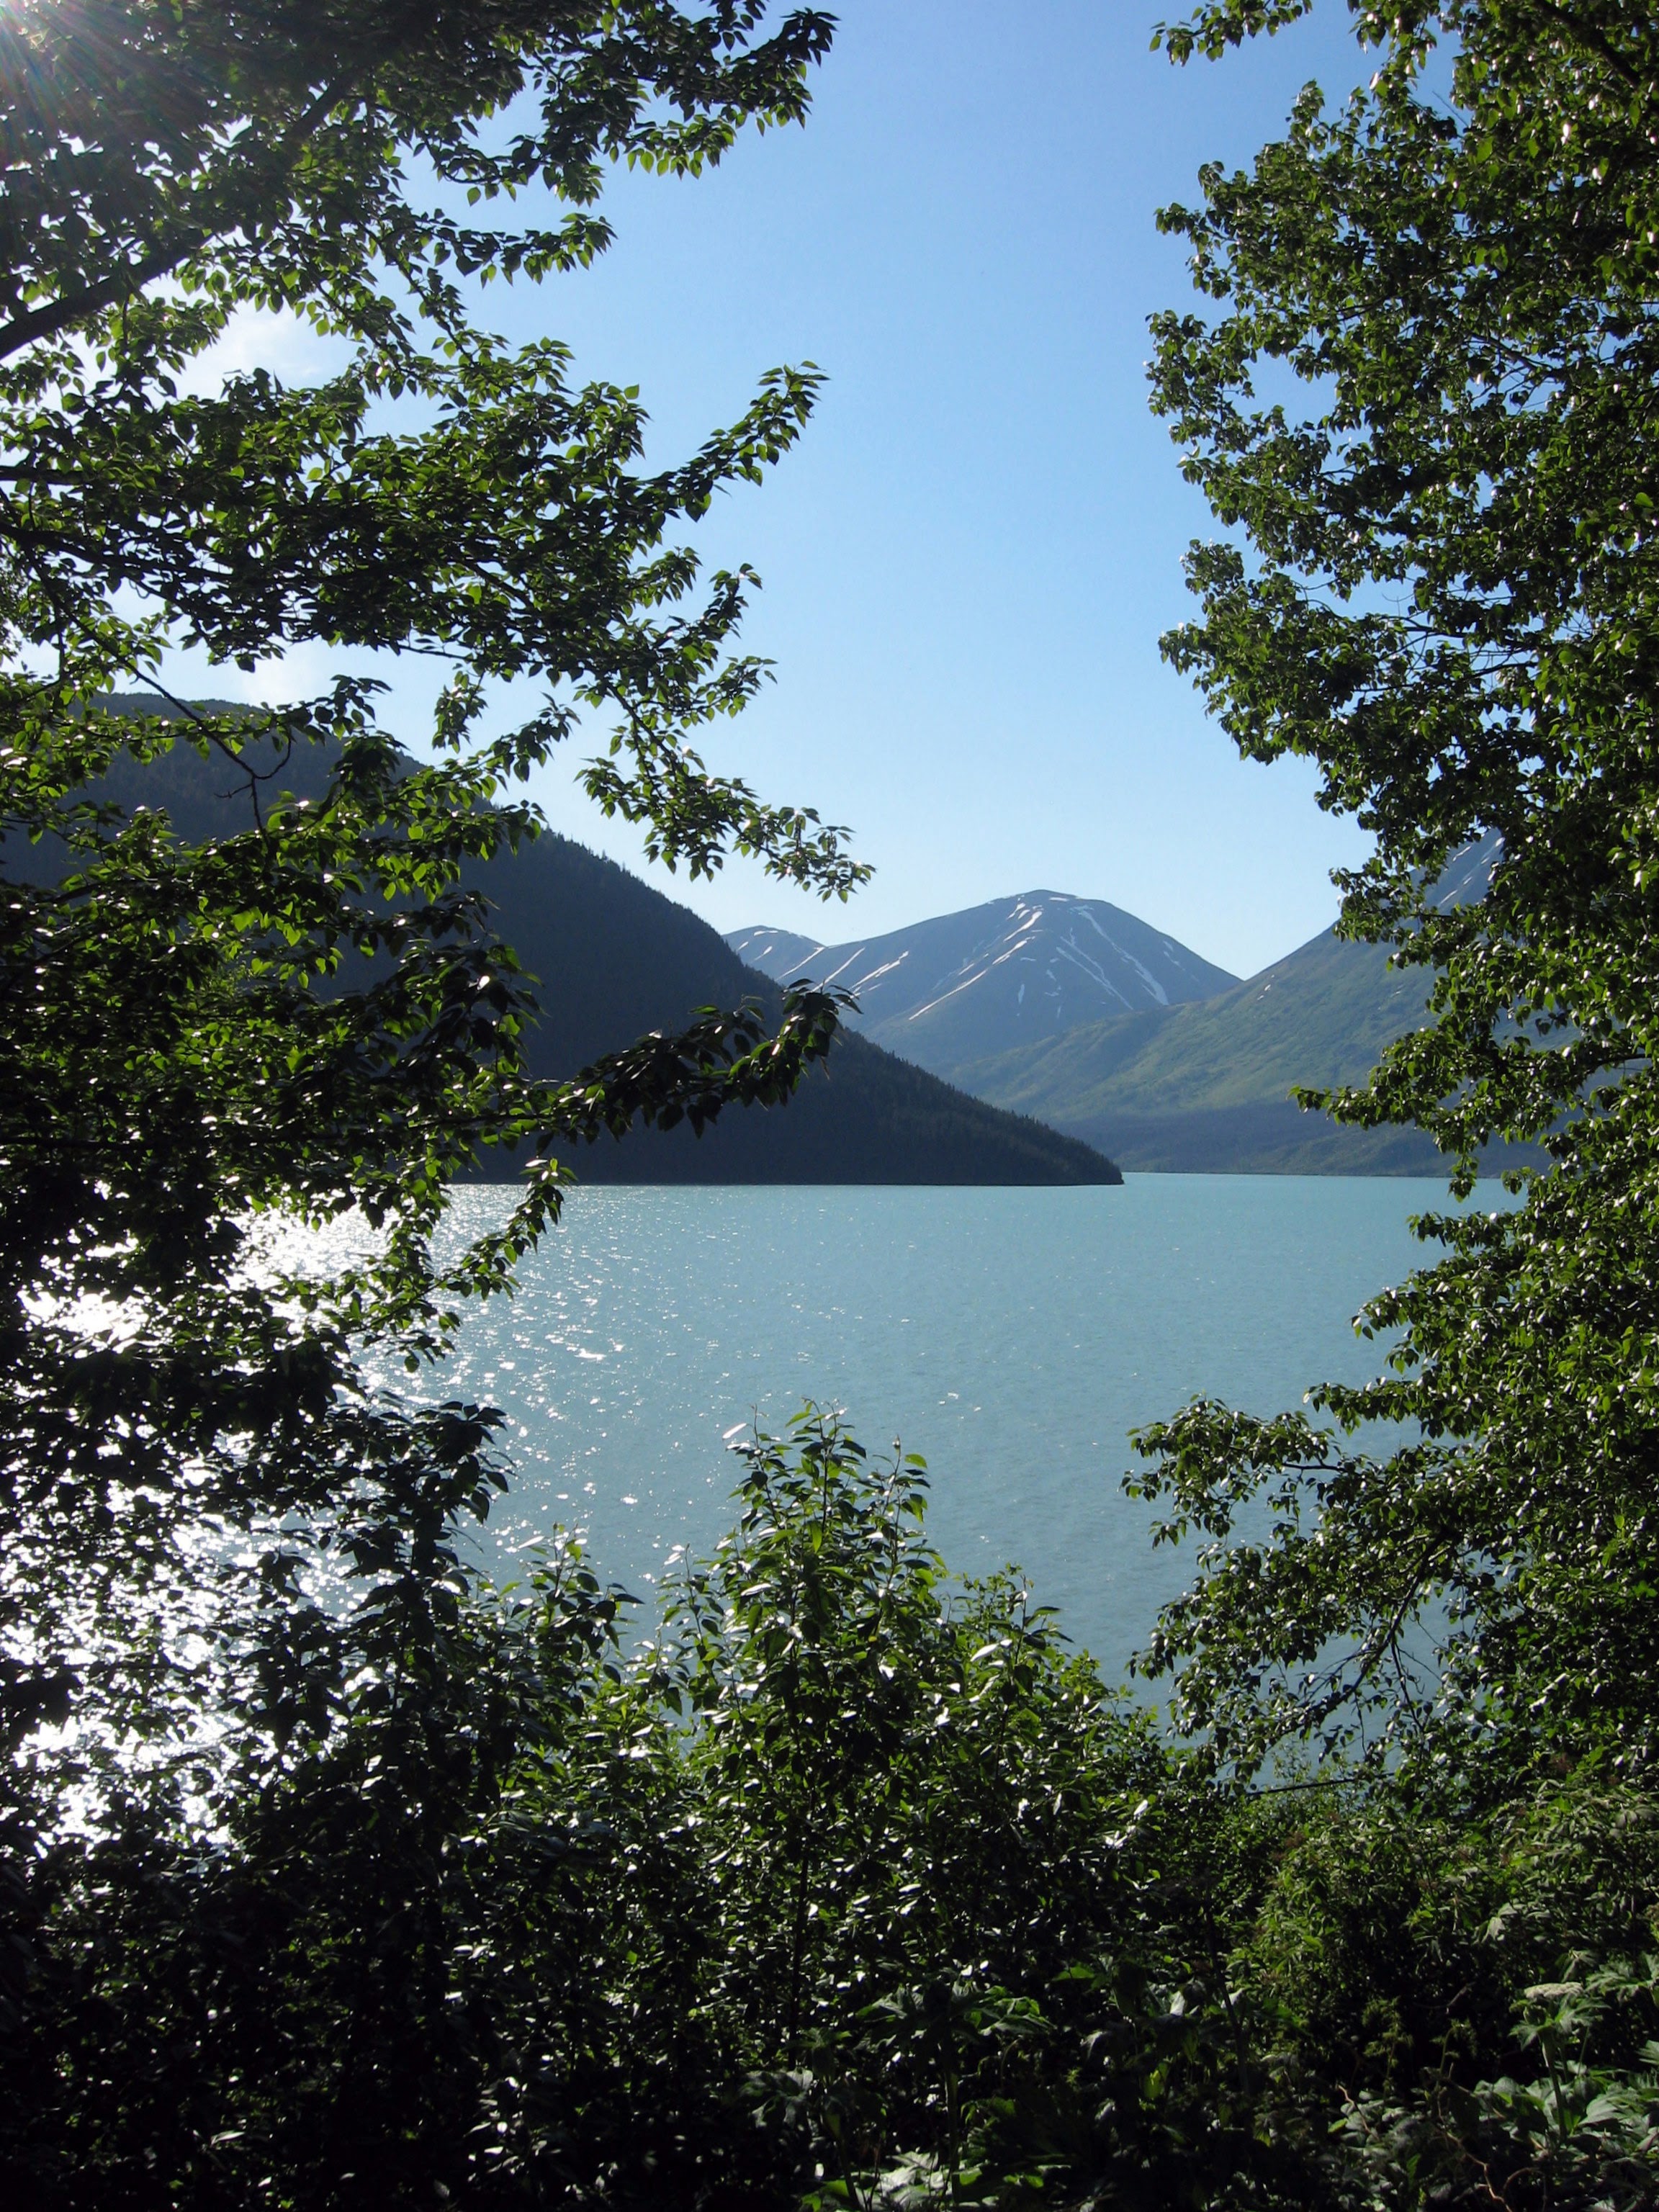 The foreground is tree branches with bright green leaves. Behind them is Kenai lake which is a tropical blue color. There are several mountains in the distance. On the left is a mountain that is covered with trees and it goes down to meet the lack about two thirds of the way to the right. On the left, behind it, isanother similar mountain but this one is taller and has some snow on it. Behind that is another, larger mountain with several snow trails. The sky is pale blue and cloudless. The lake water is brighter than the sky.